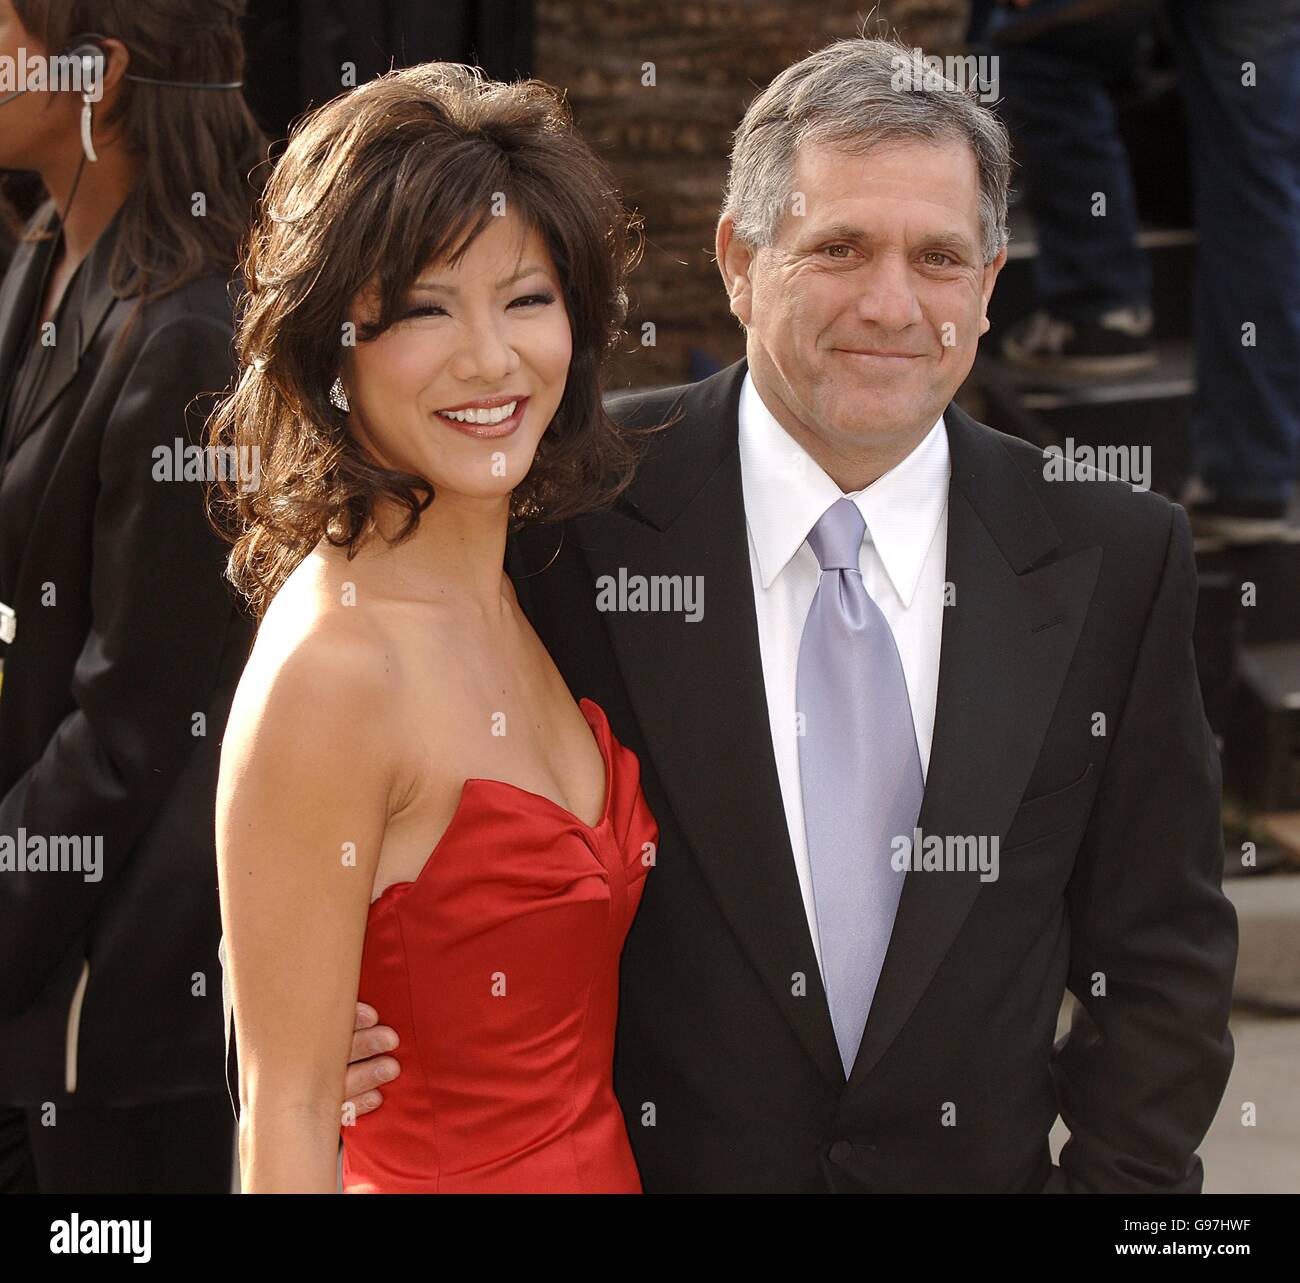 Vanity Fair Post Oscars Party - Mortons Restaurant. Julie Chen and Les Moonves arrive on the red carpet. Stock Photo